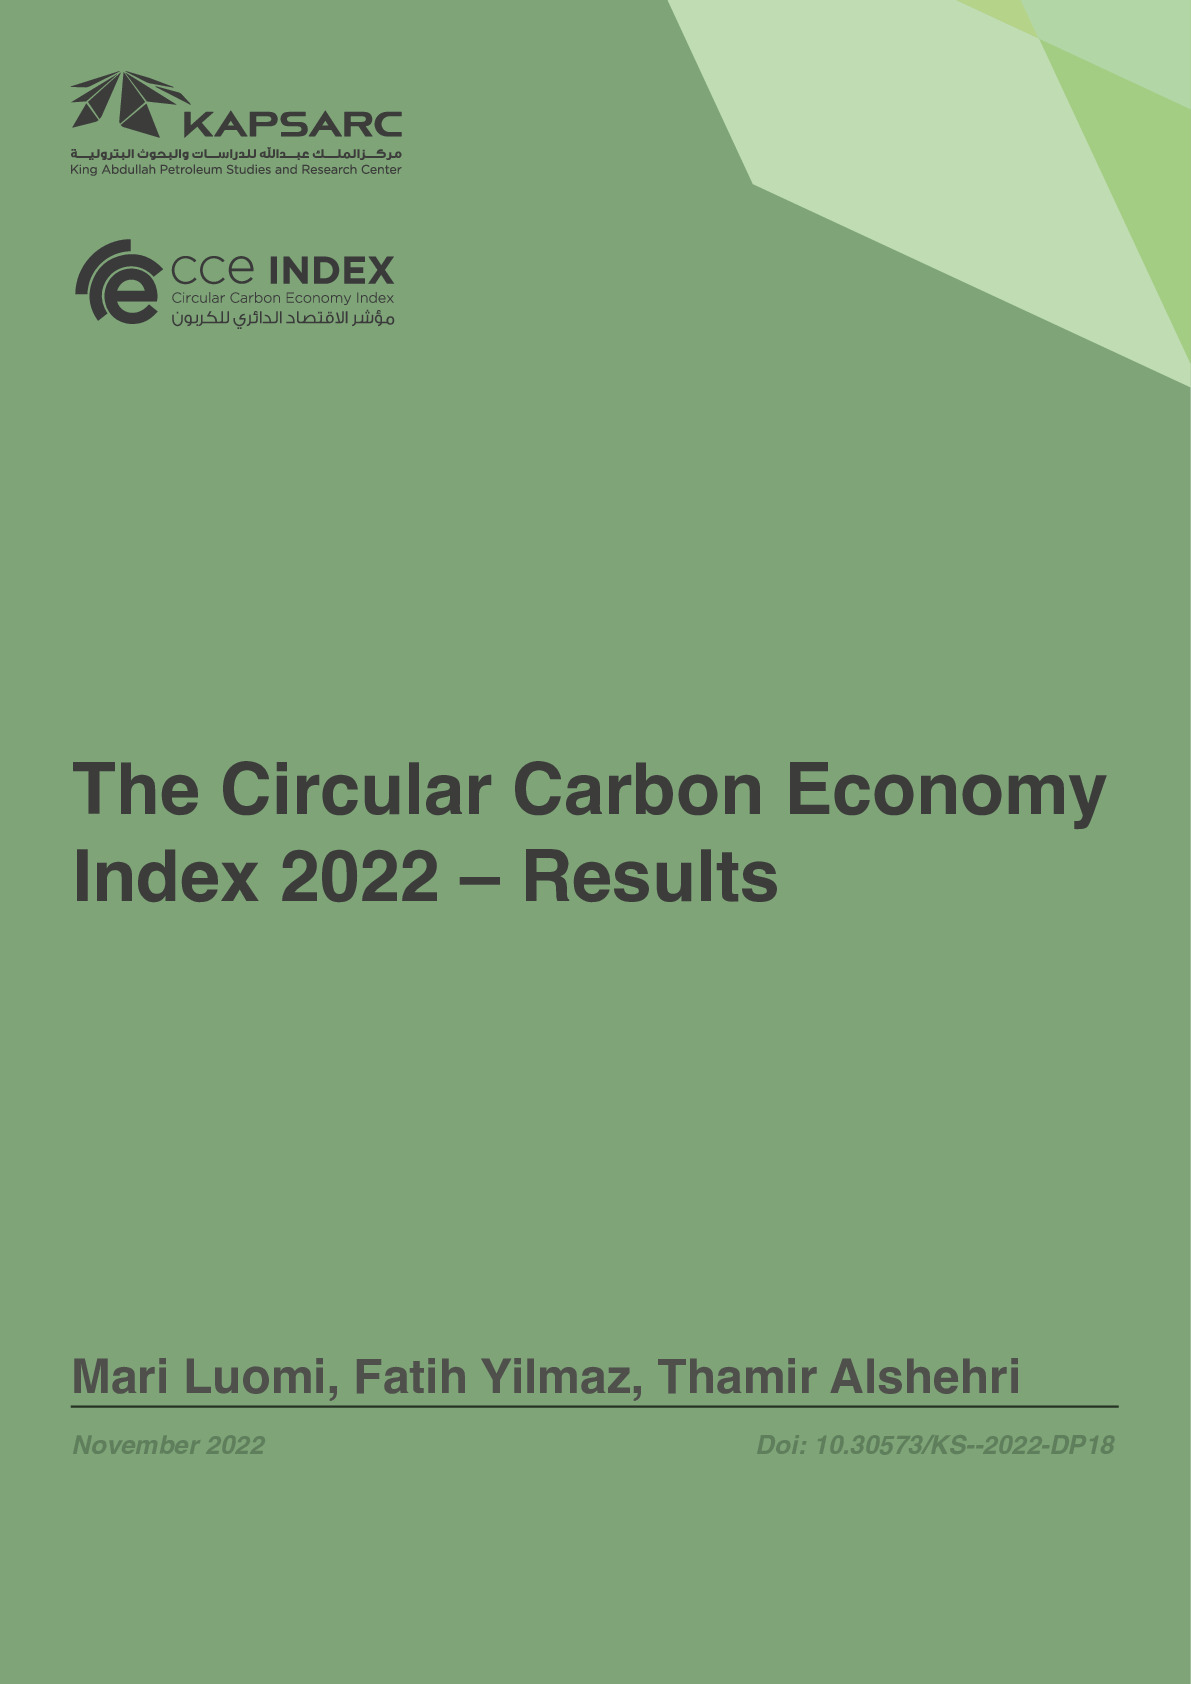 The Circular Carbon Economy Index 2022 – Results